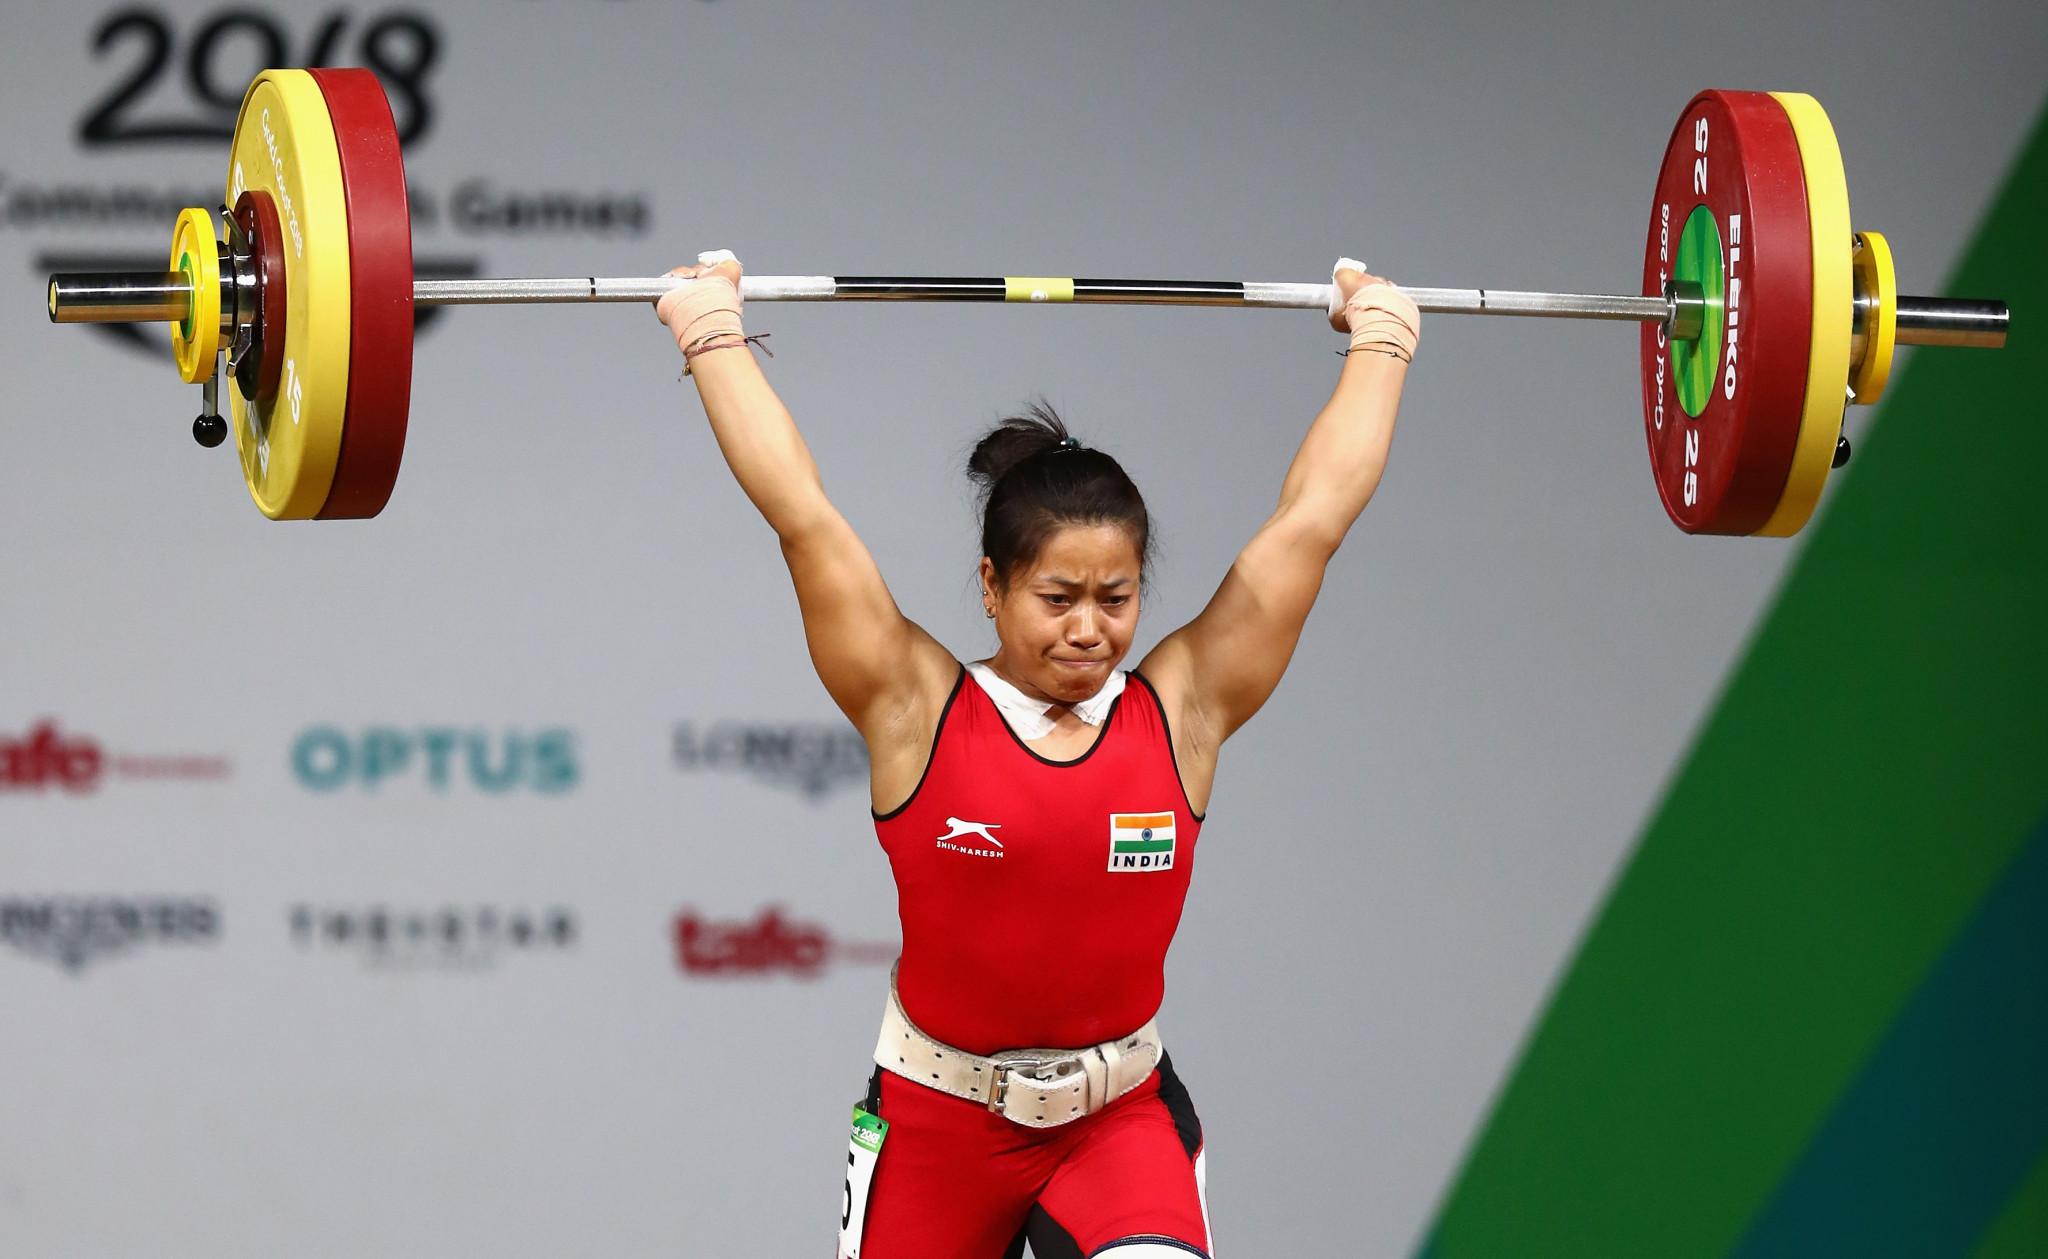 Indian gold medallist and Spaniard among new weightlifting positives 